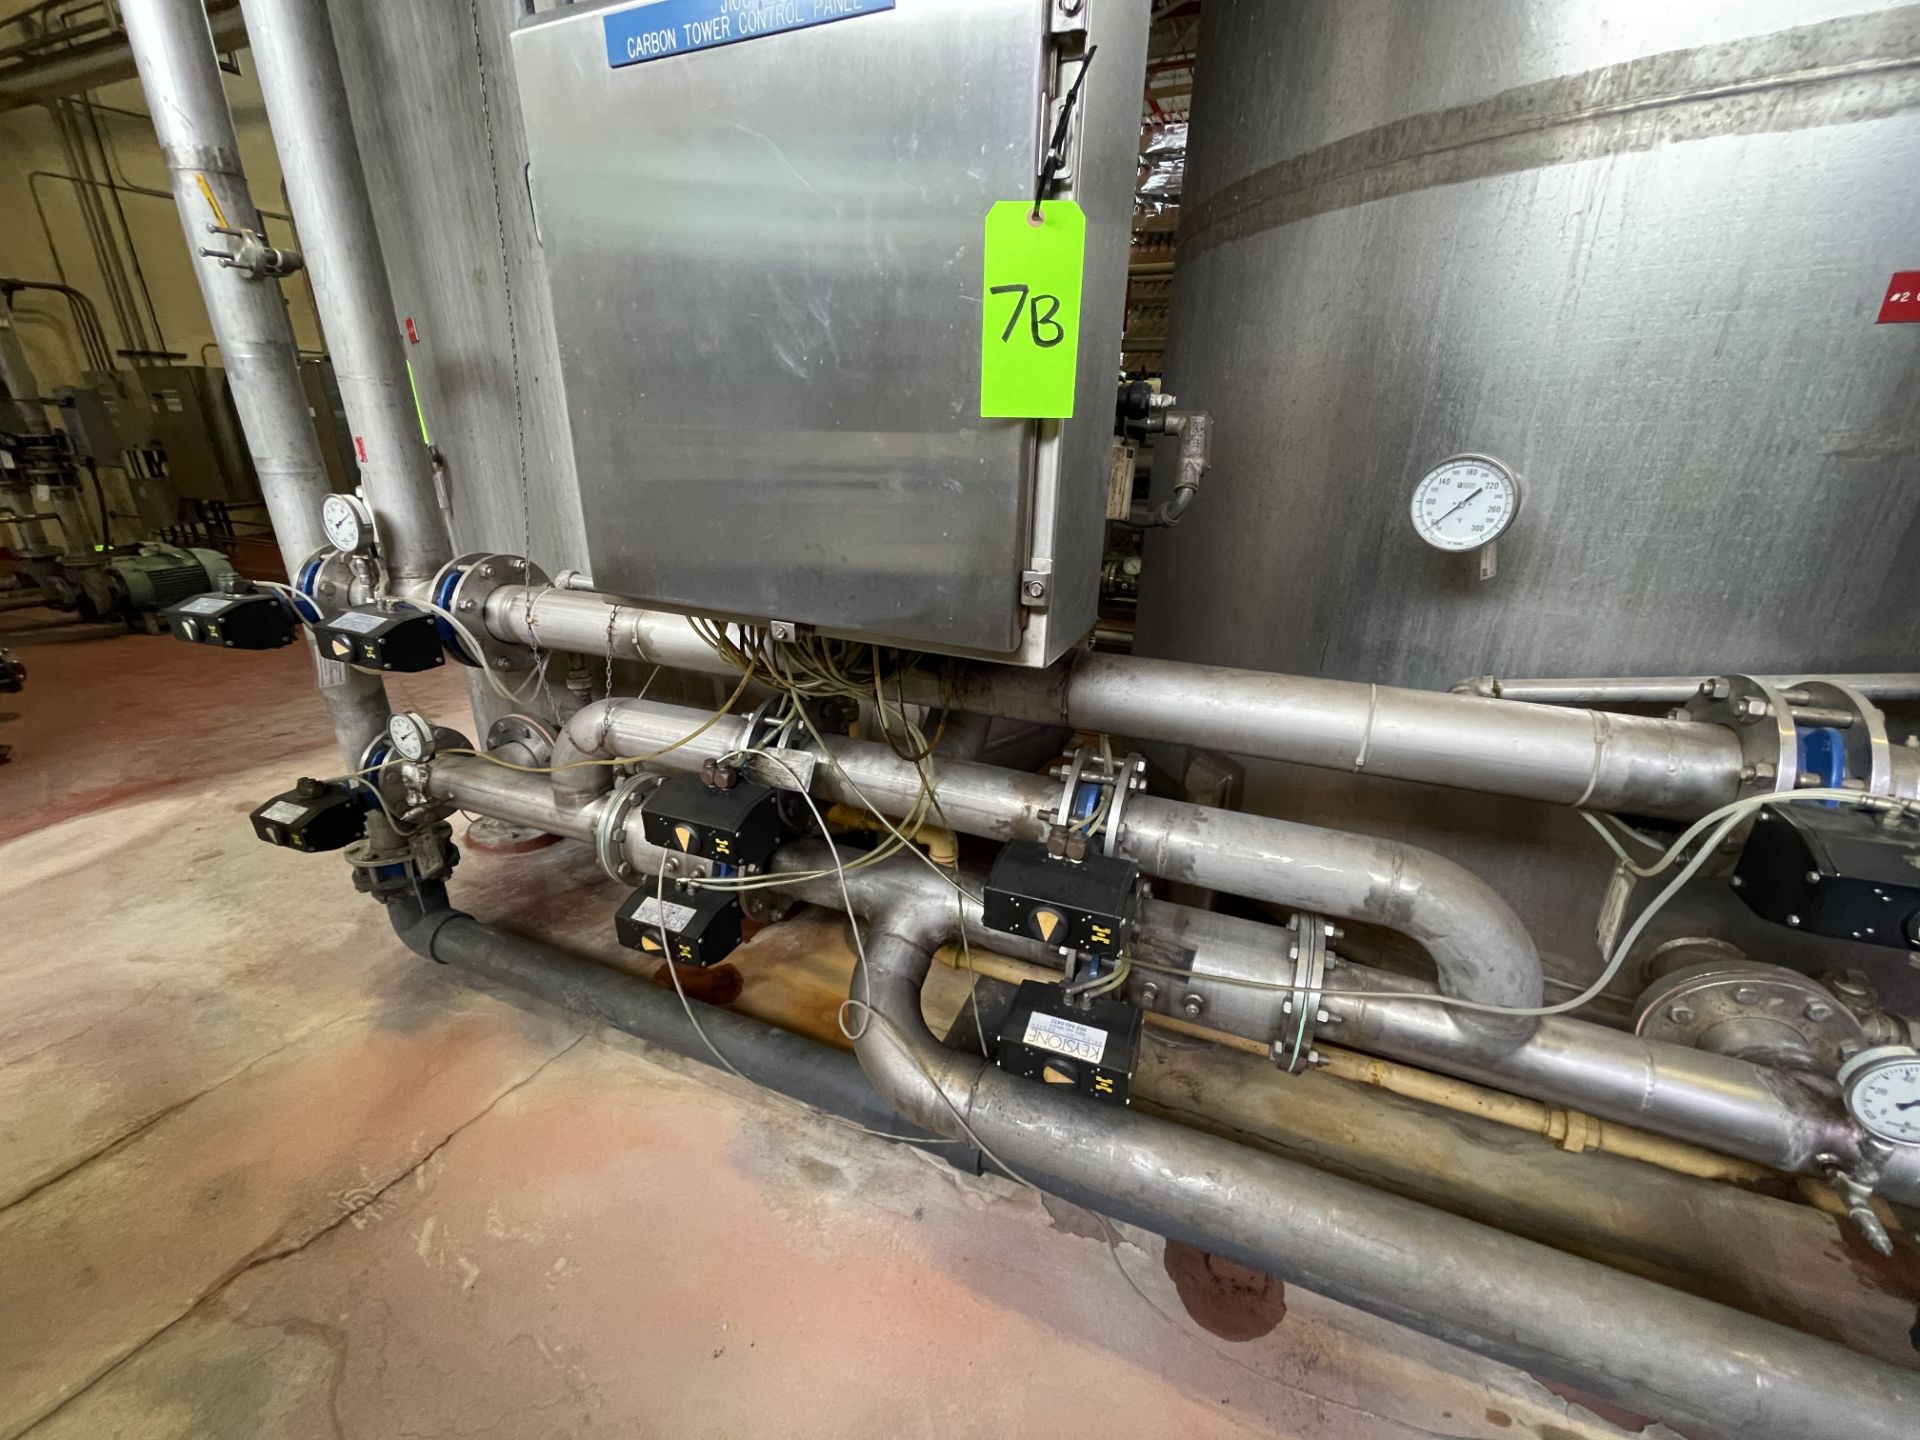 Stainless Steel Water Treatment Pipe Manifold with Control Panel - Image 2 of 3